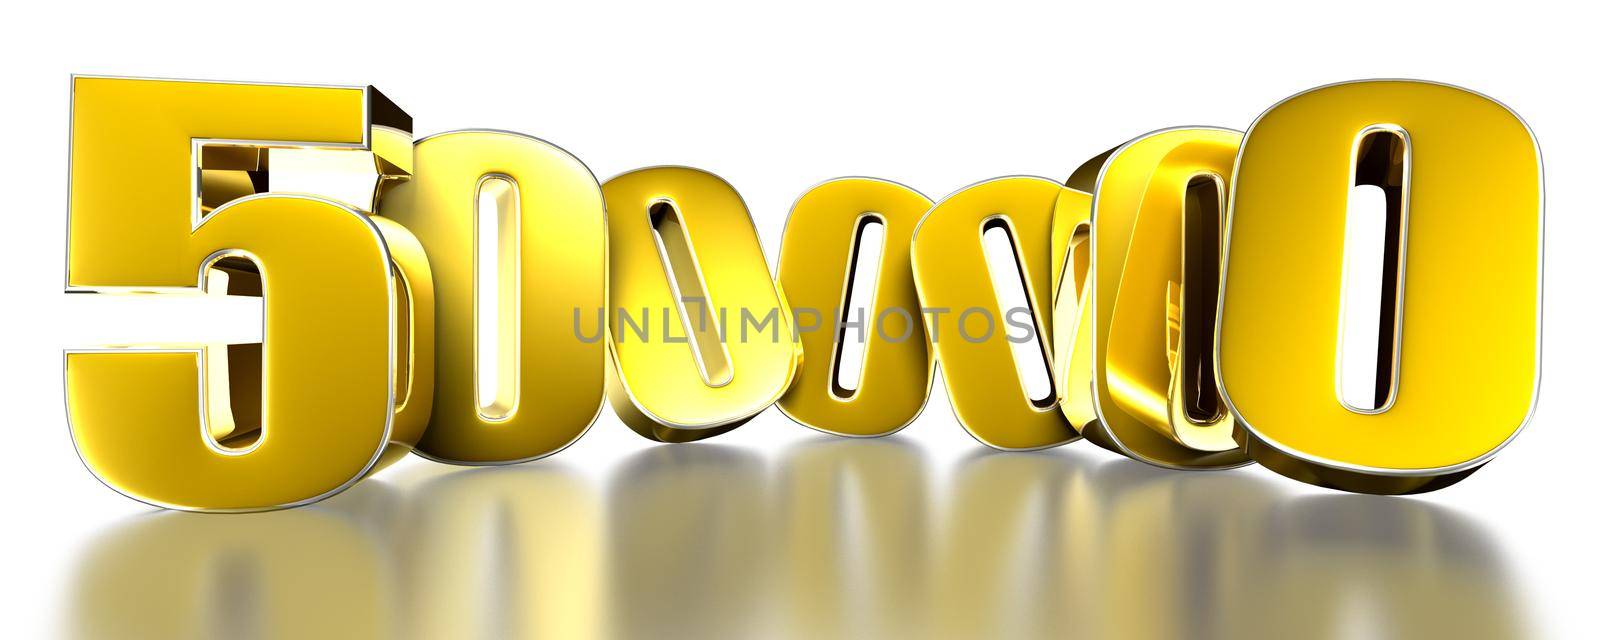 5 000 000 gold 3D illustration on white background with clipping path. by thitimontoyai